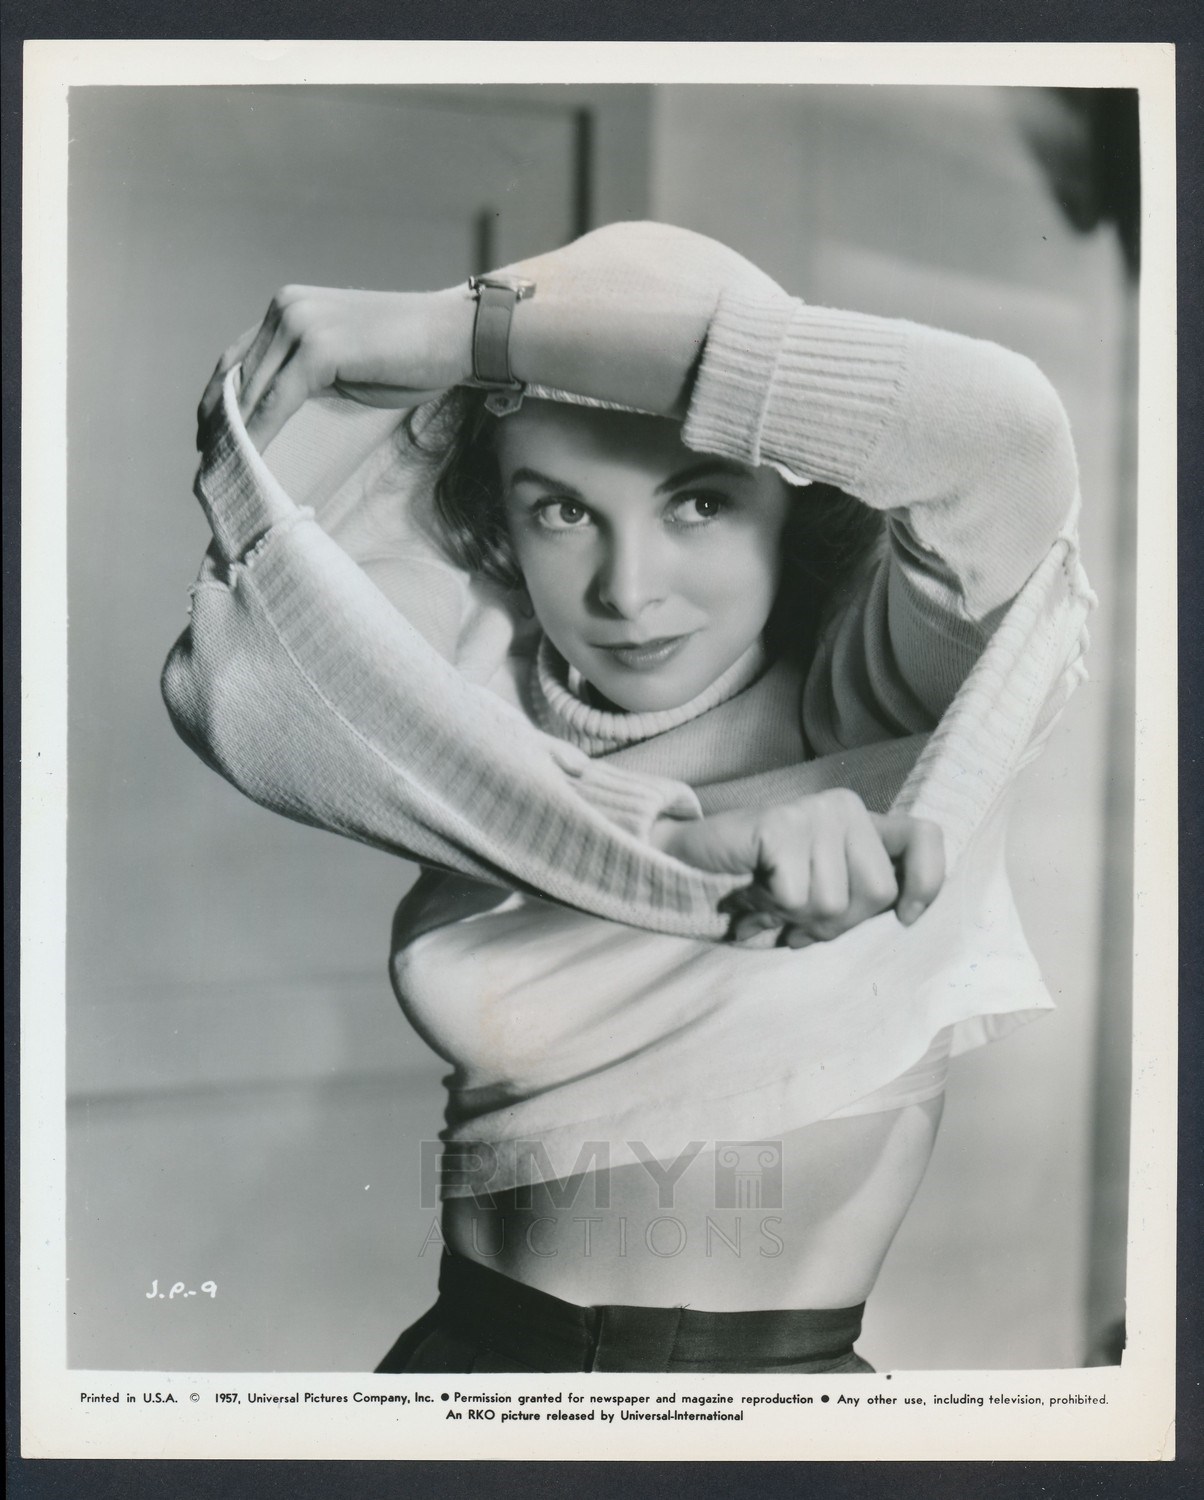 Lot Janet Leigh Caught In A Seductive Position Pin Up Style Studio Photo